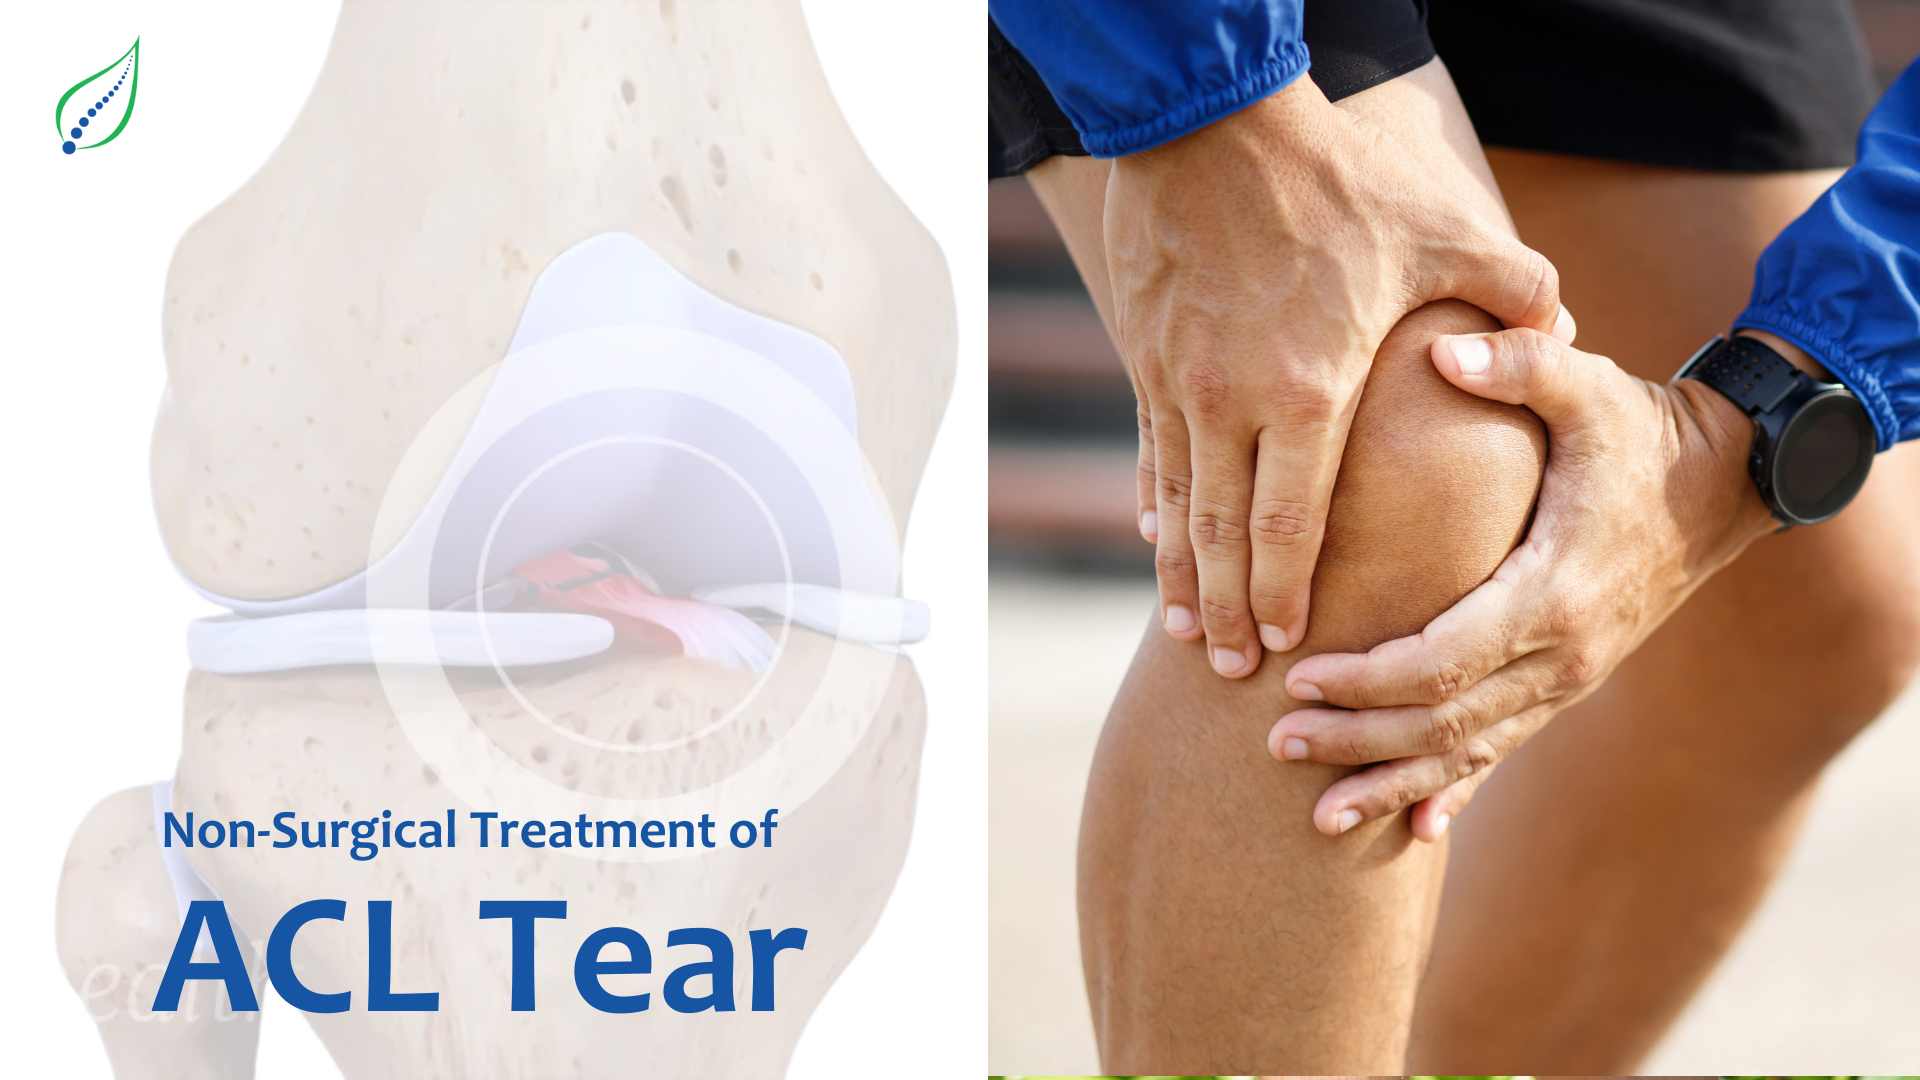 Non-Surgical Treatment of ACL Tear